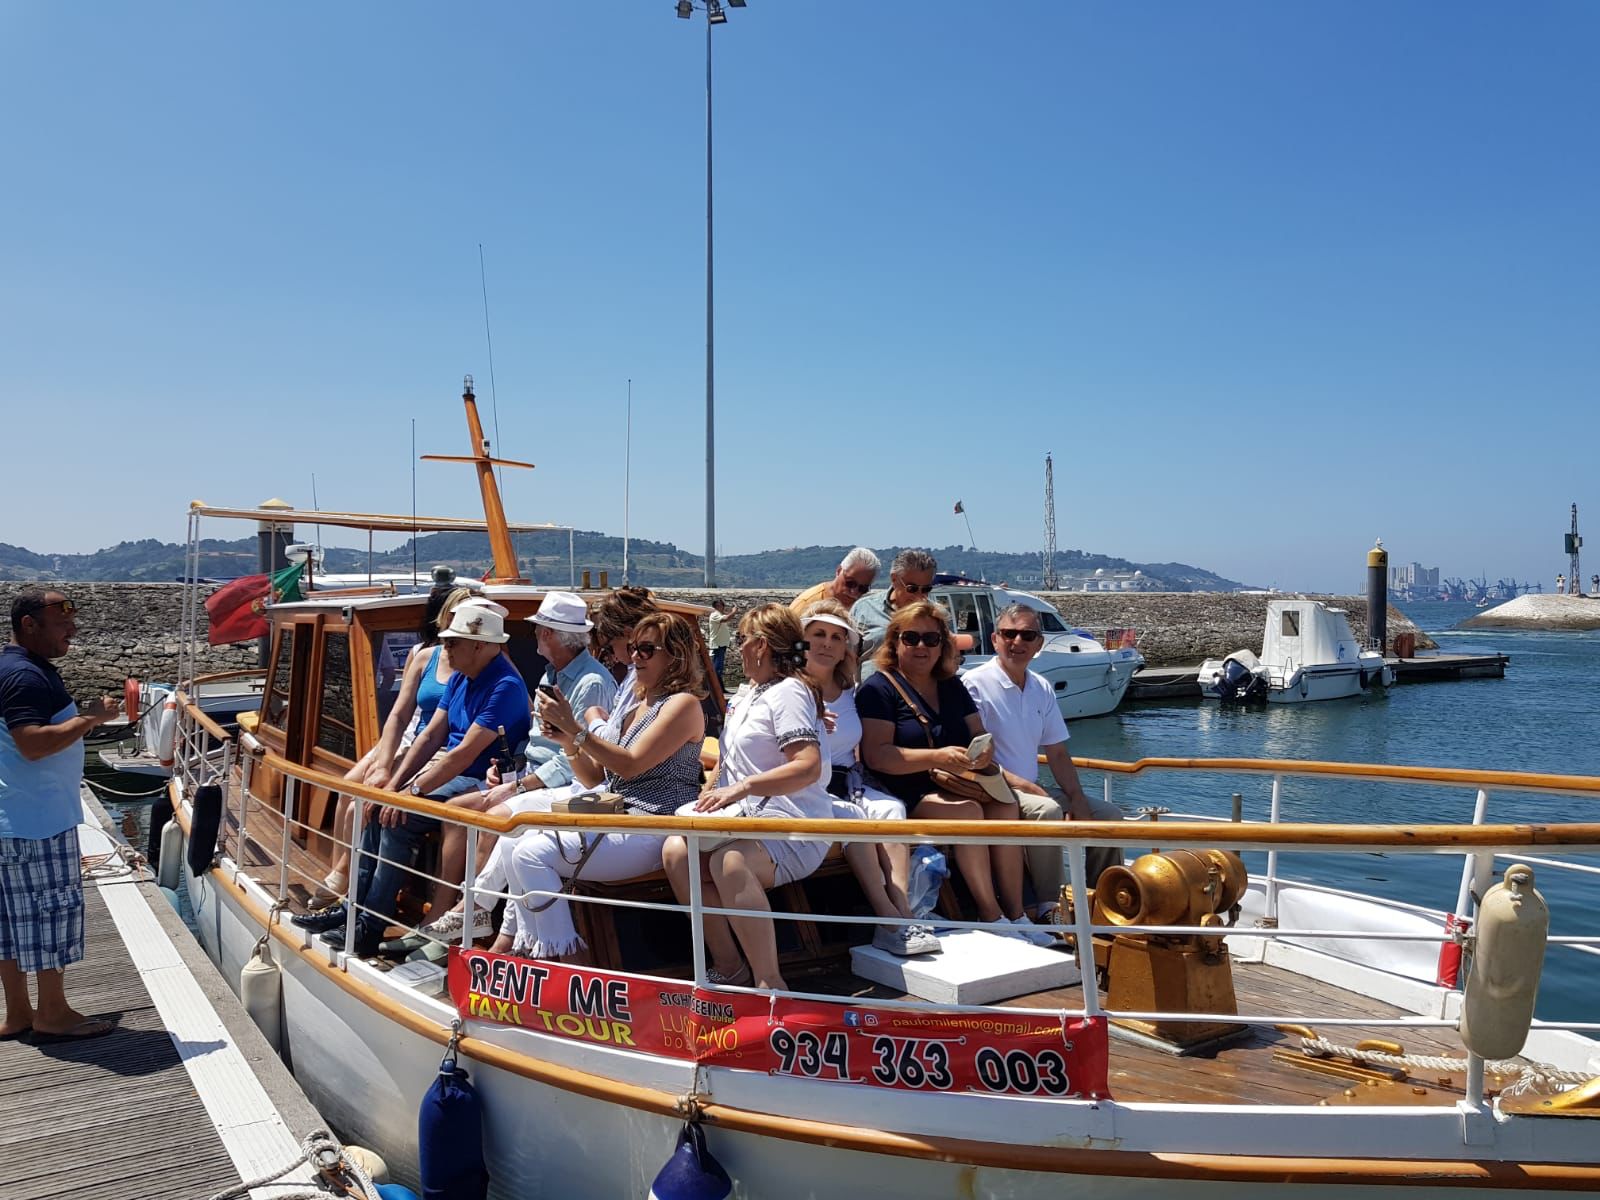 Boat trip on the Tagus river Lisbon
